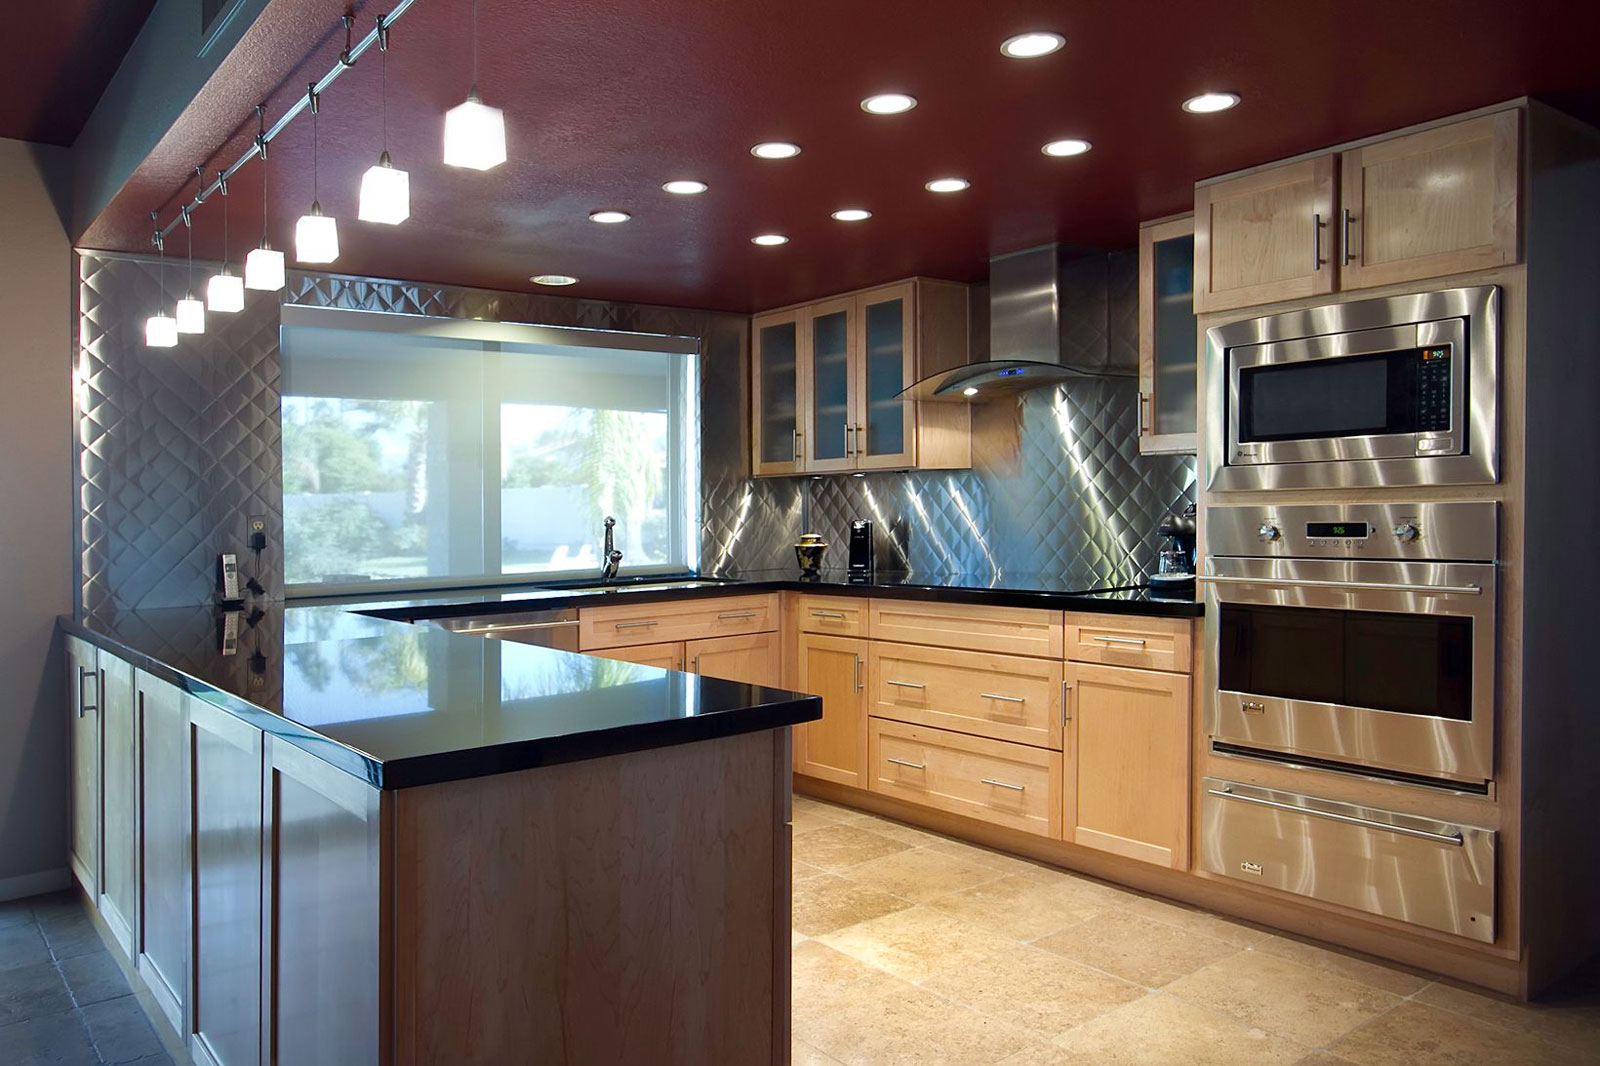 Modern Kitchen Ceilling Appealing Modern Kitchen Remodeling Applying Ceiling Lighting With Sectional Kitchen Cupboards Furnished With Sink And Electric Range And Completed With Ovens The Stylish And Simplest Kitchen Remodeling Ways